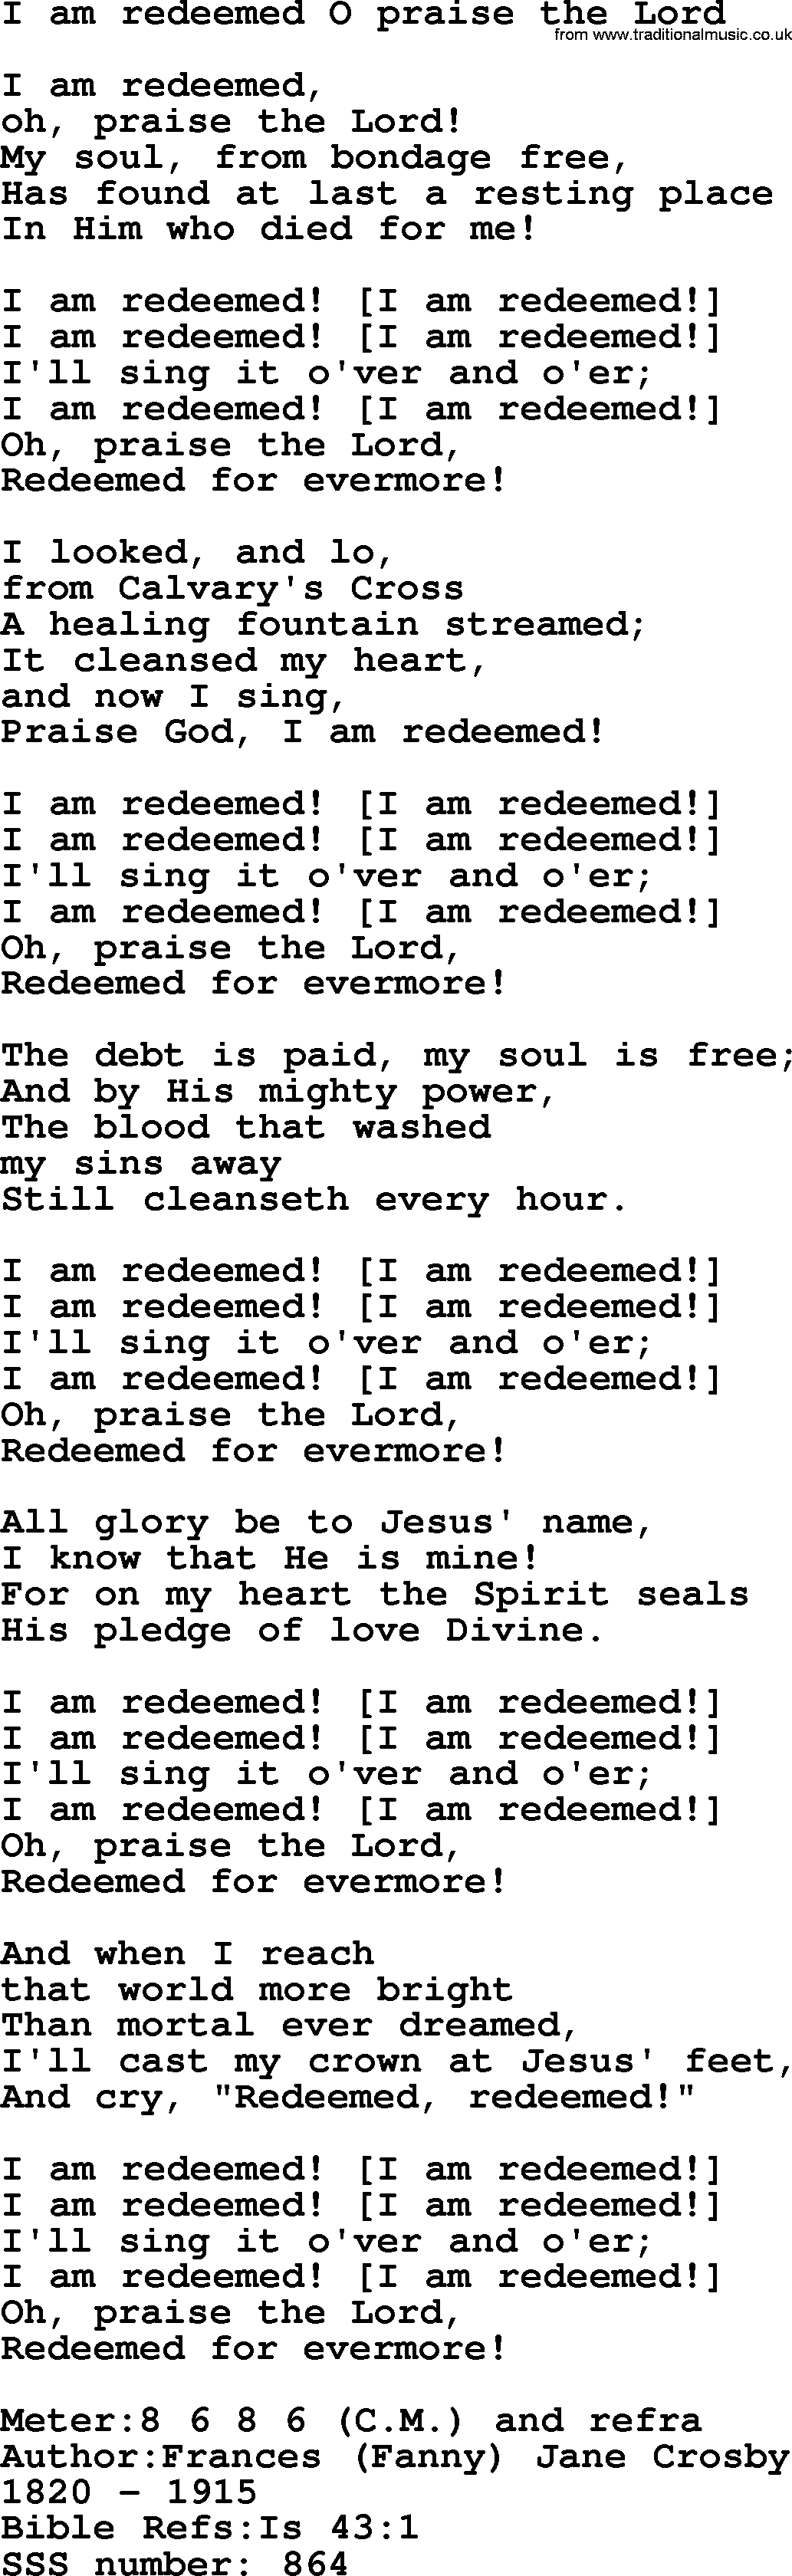 Sacred Songs and Solos complete, 1200 Hymns, title: I Am Redeemed O Praise The Lord, lyrics and PDF